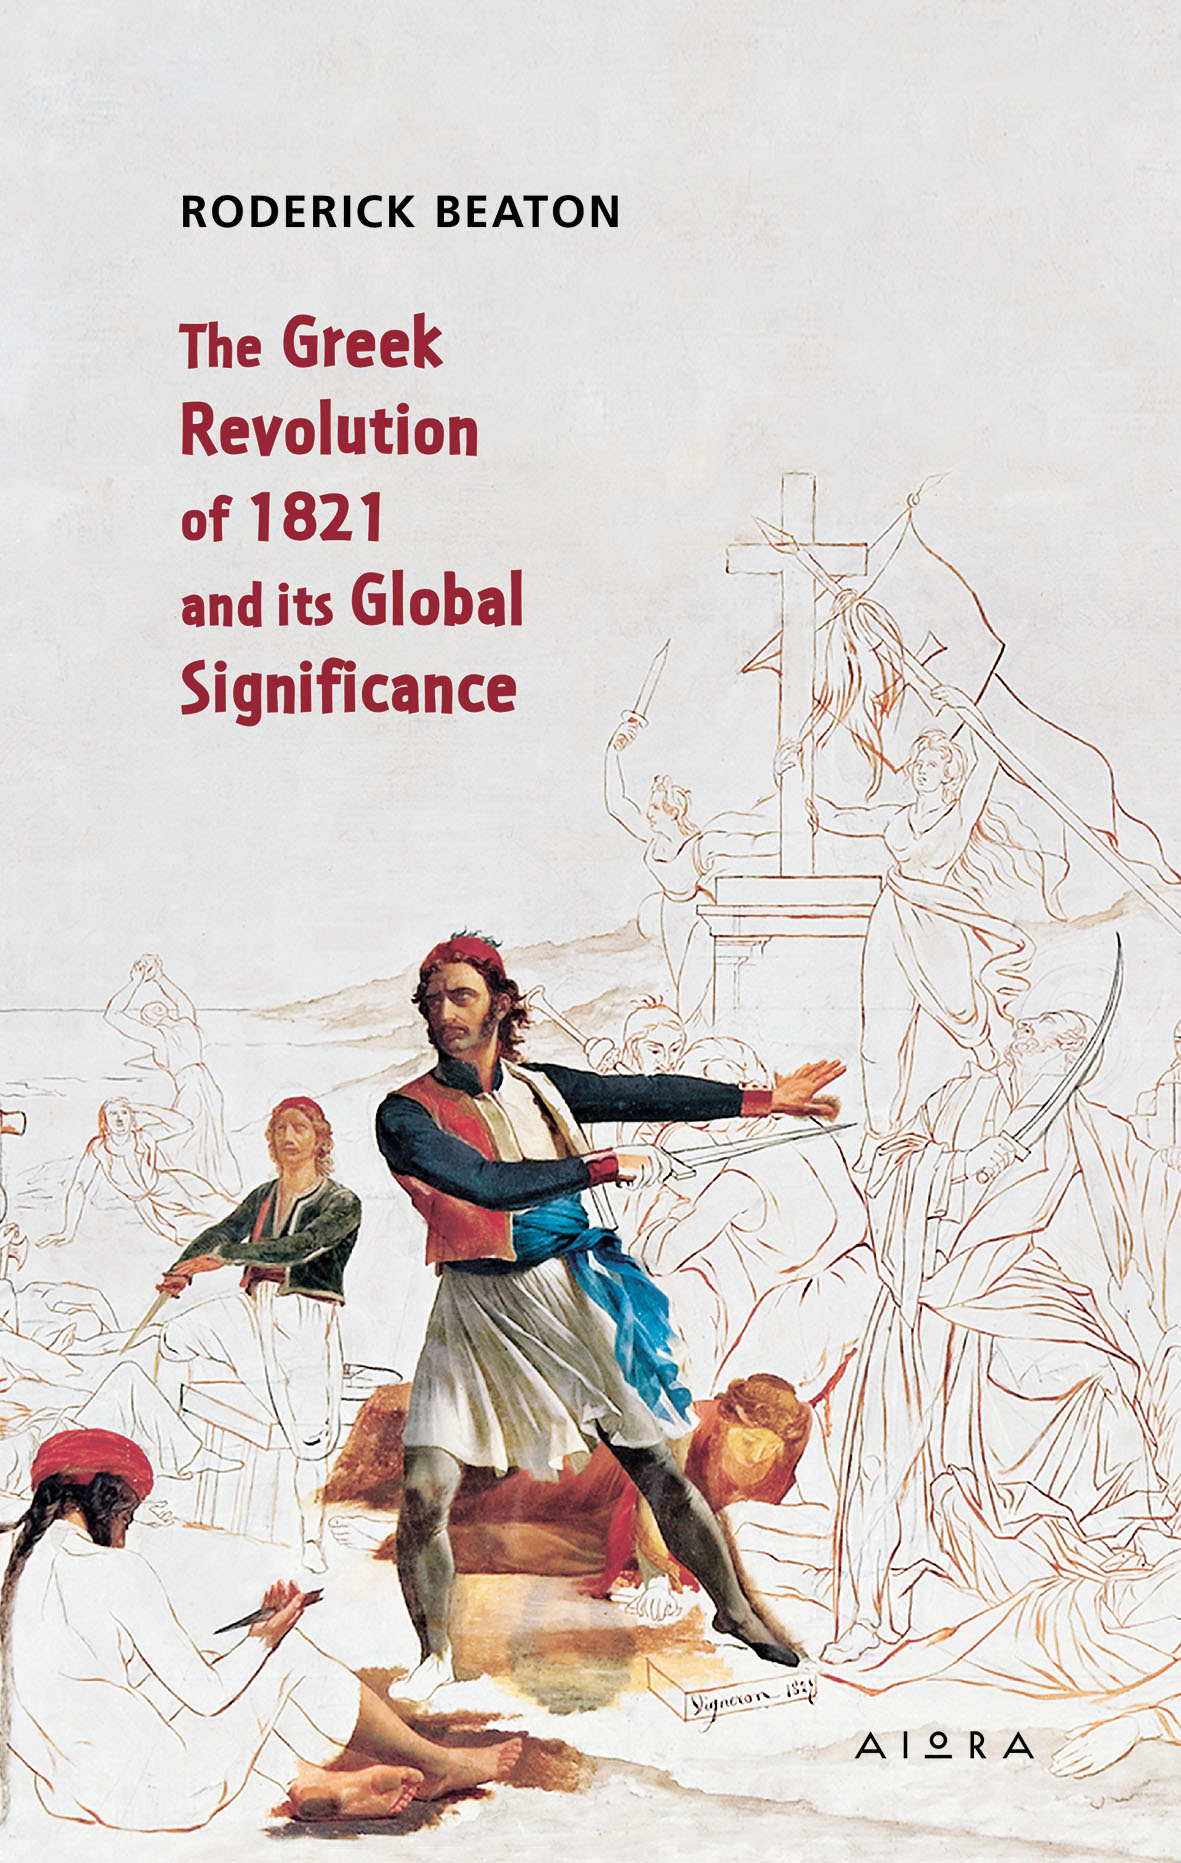 The Greek Revolution of 1821 and its global significance, , Beaton, Roderick, Αιώρα, 2021